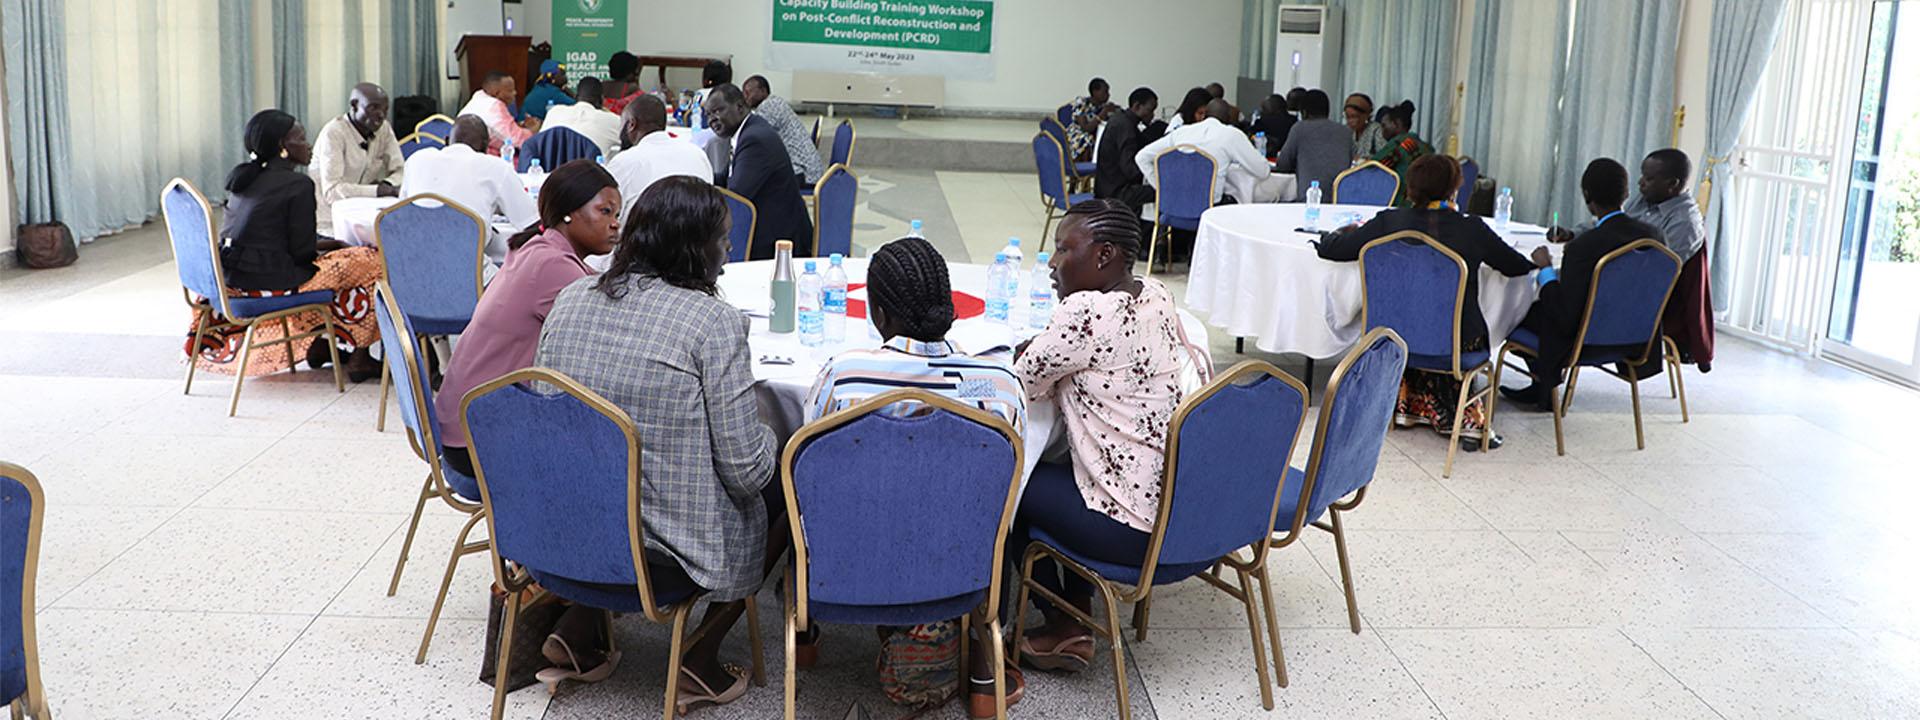 IGAD Strengthens the Capacities of South Sudanese on Post-Conflict Reconstruction and Development